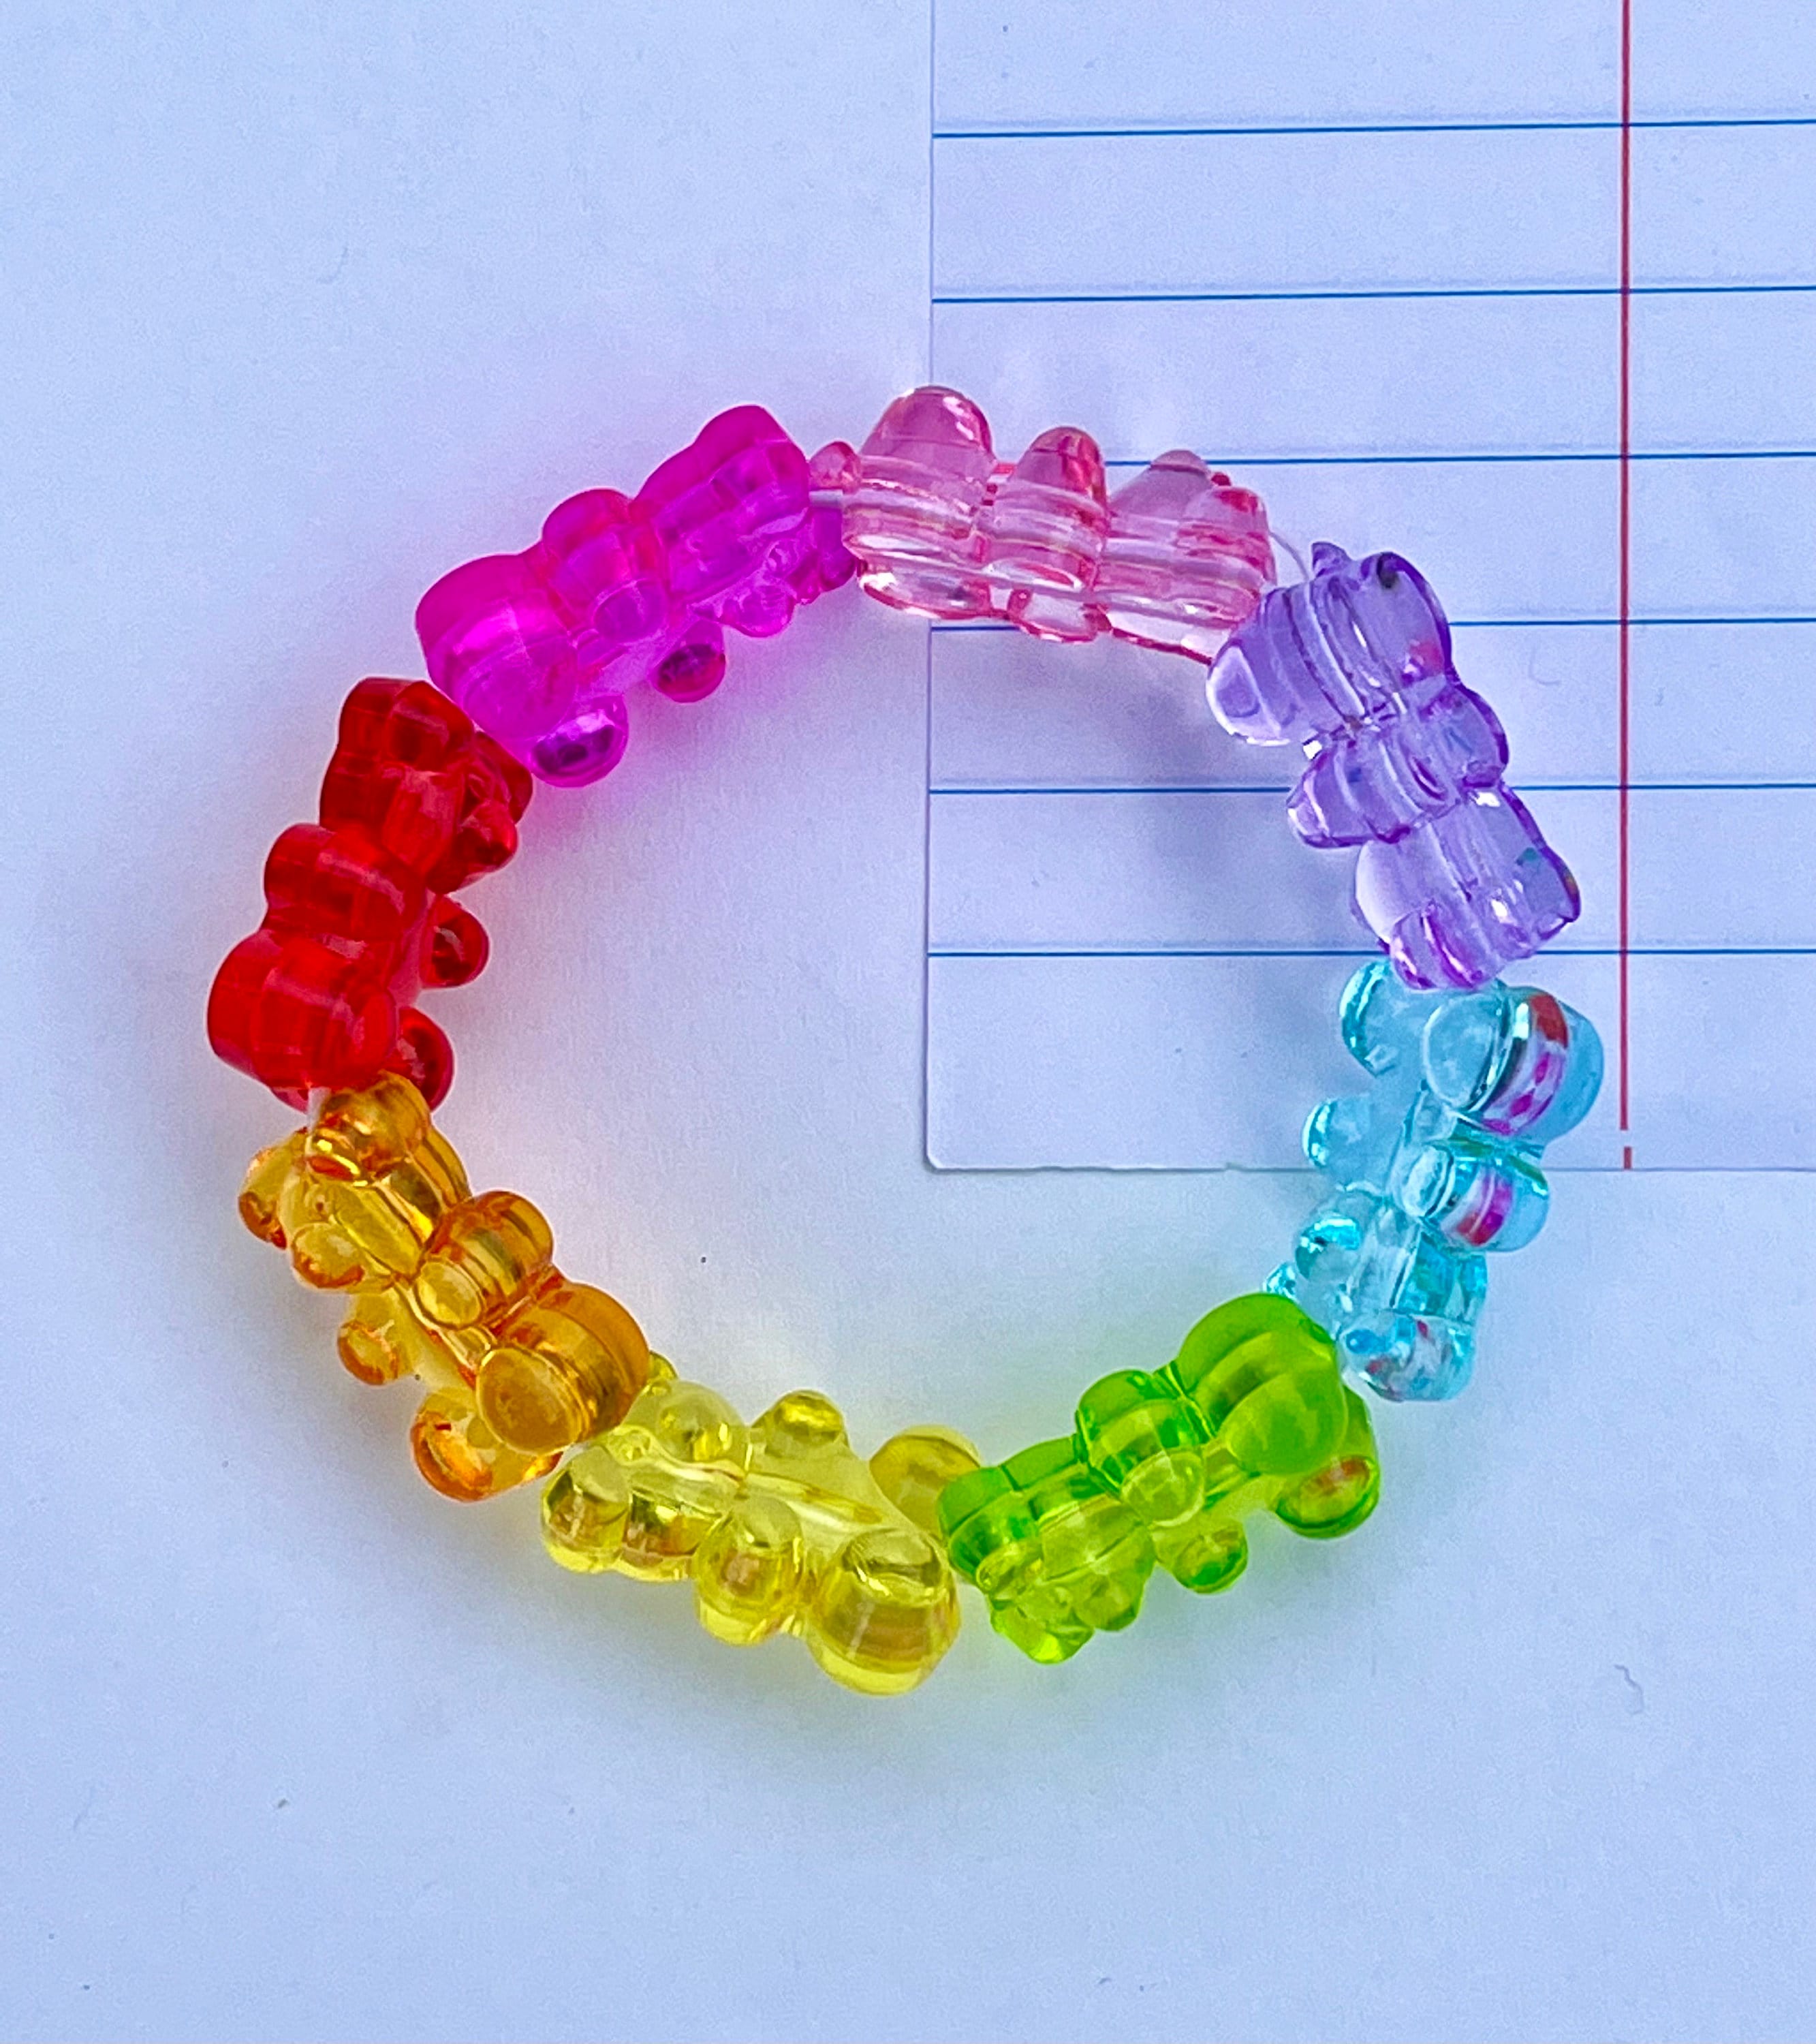 Gummy Bear Charms/ Resin Gummy Bear Charms with Hooks/ Jewelry Making Supplies/ 11x22mm/ 2 Pieces